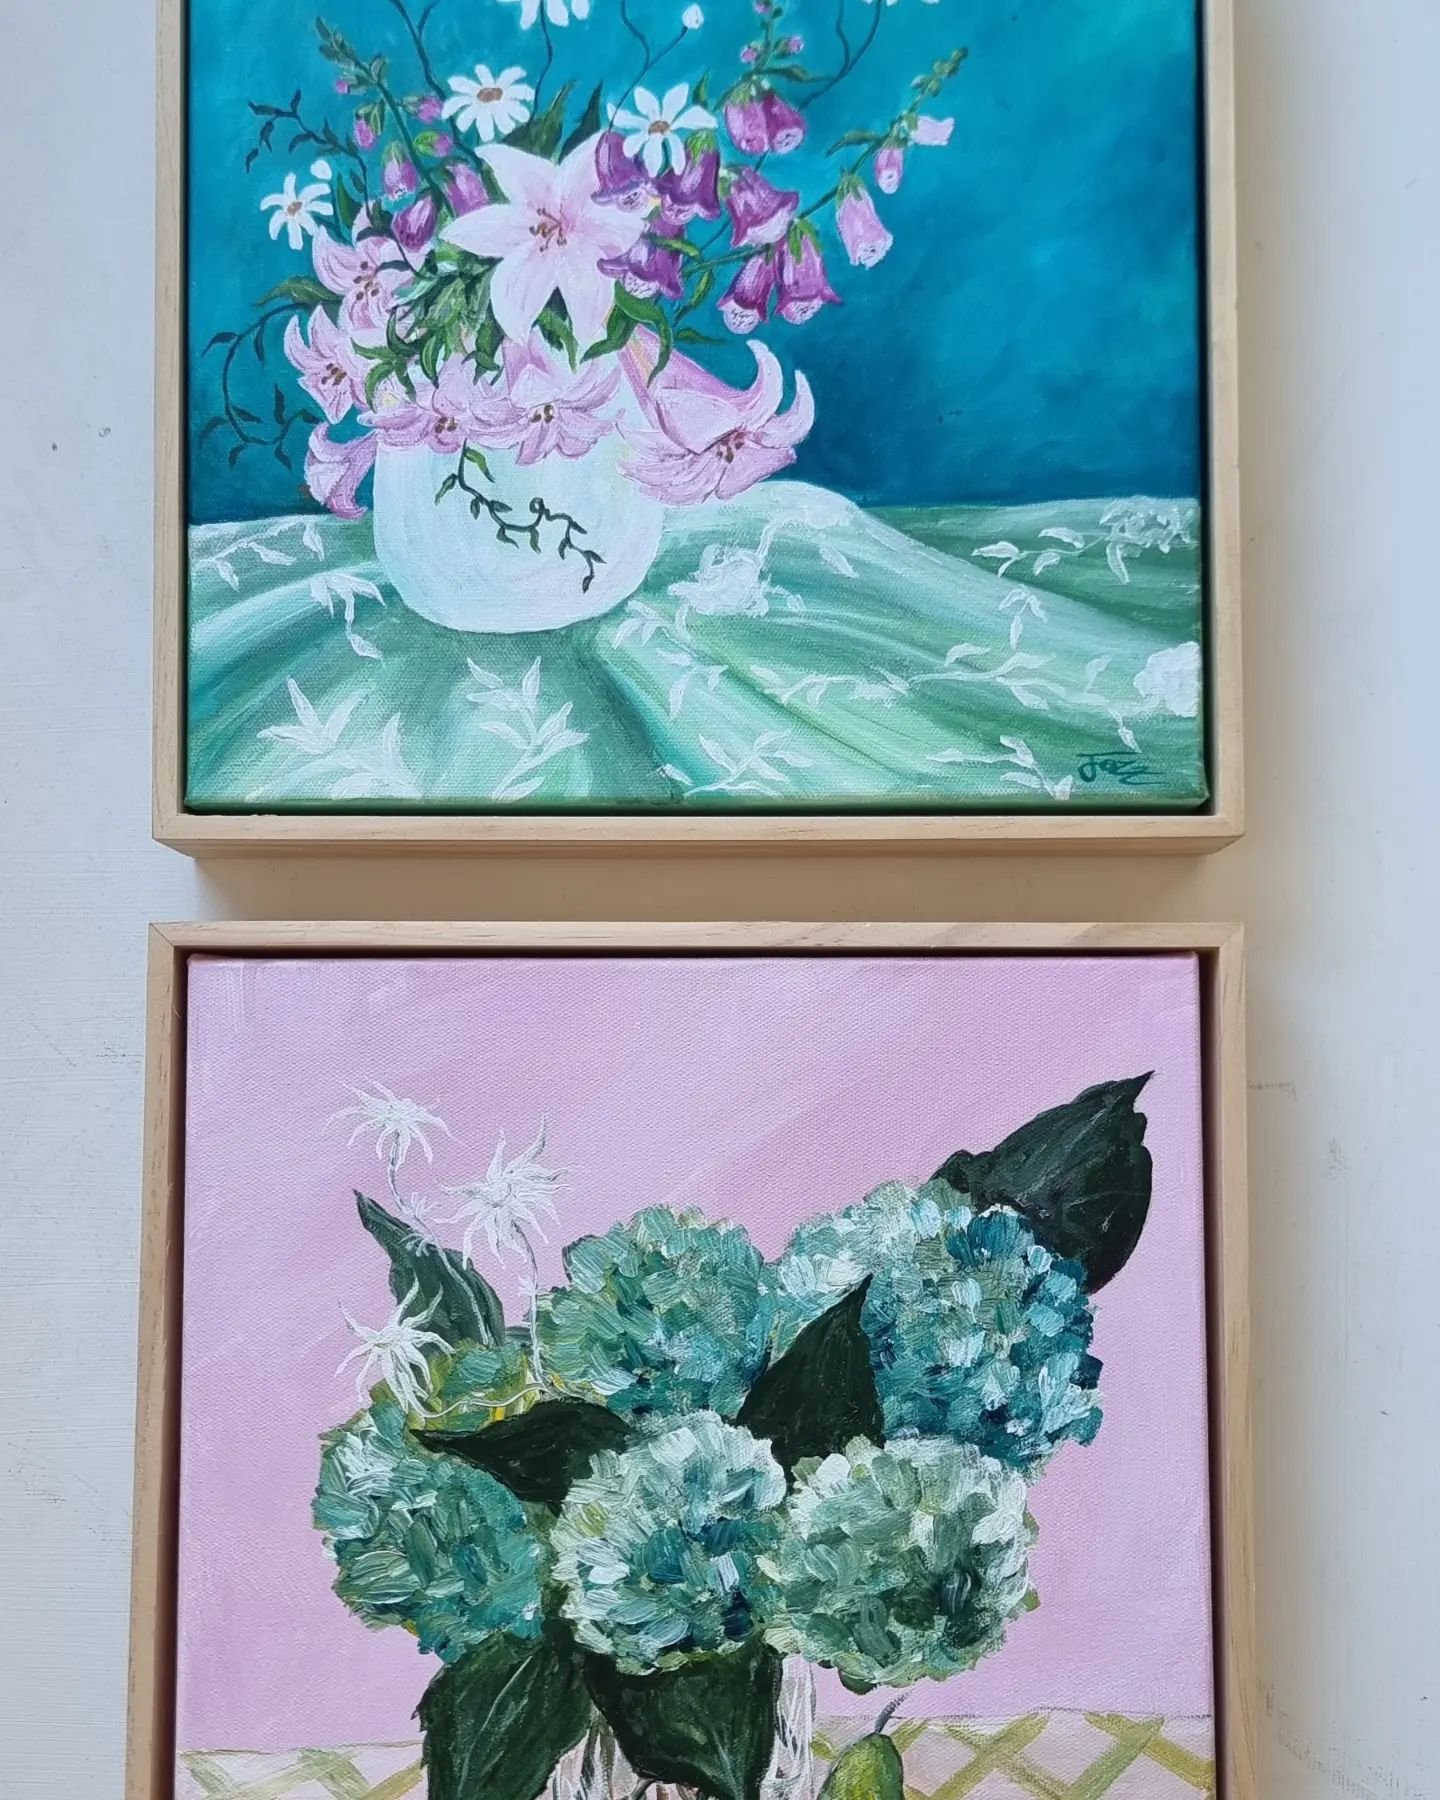 Matchy but not matchy matchy 
How sweet would this look on your wall!? 
Both available on our website shop ORIGINALS 
Link in bio x

#artistrybyjasmine #paintings #originalart #floralart #floralartist #flowerpainting #flowerpainting #flowers #impress